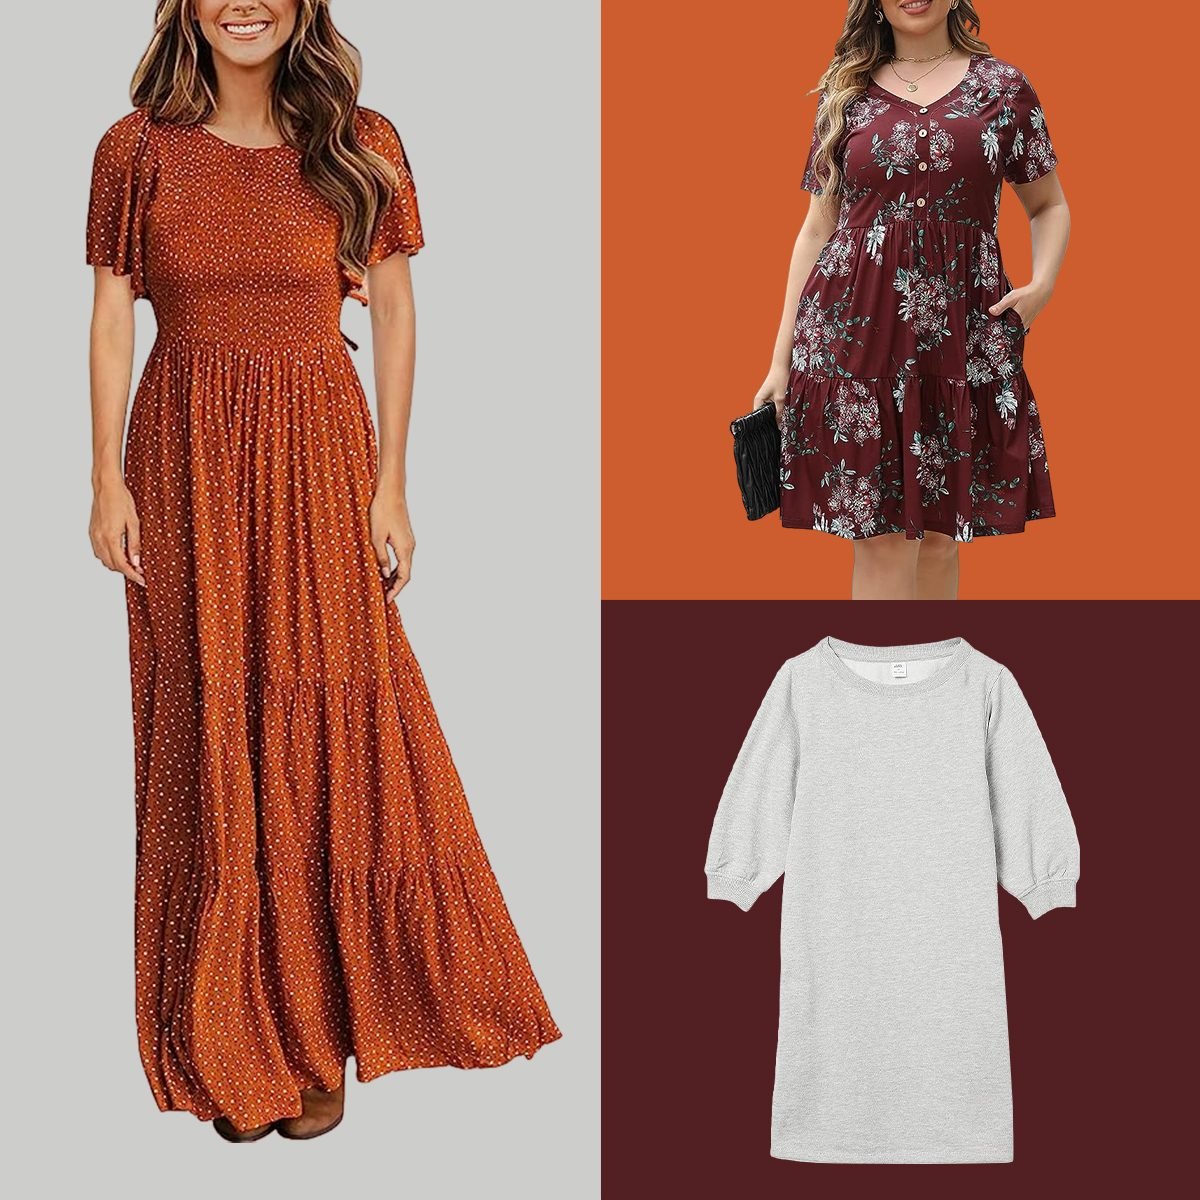 https://www.rd.com/wp-content/uploads/2023/07/15-Amazon-Fall-Dresses-to-Fill-Your-Closet-for-the-New-Season_FT_via-amazon.com_.jpg